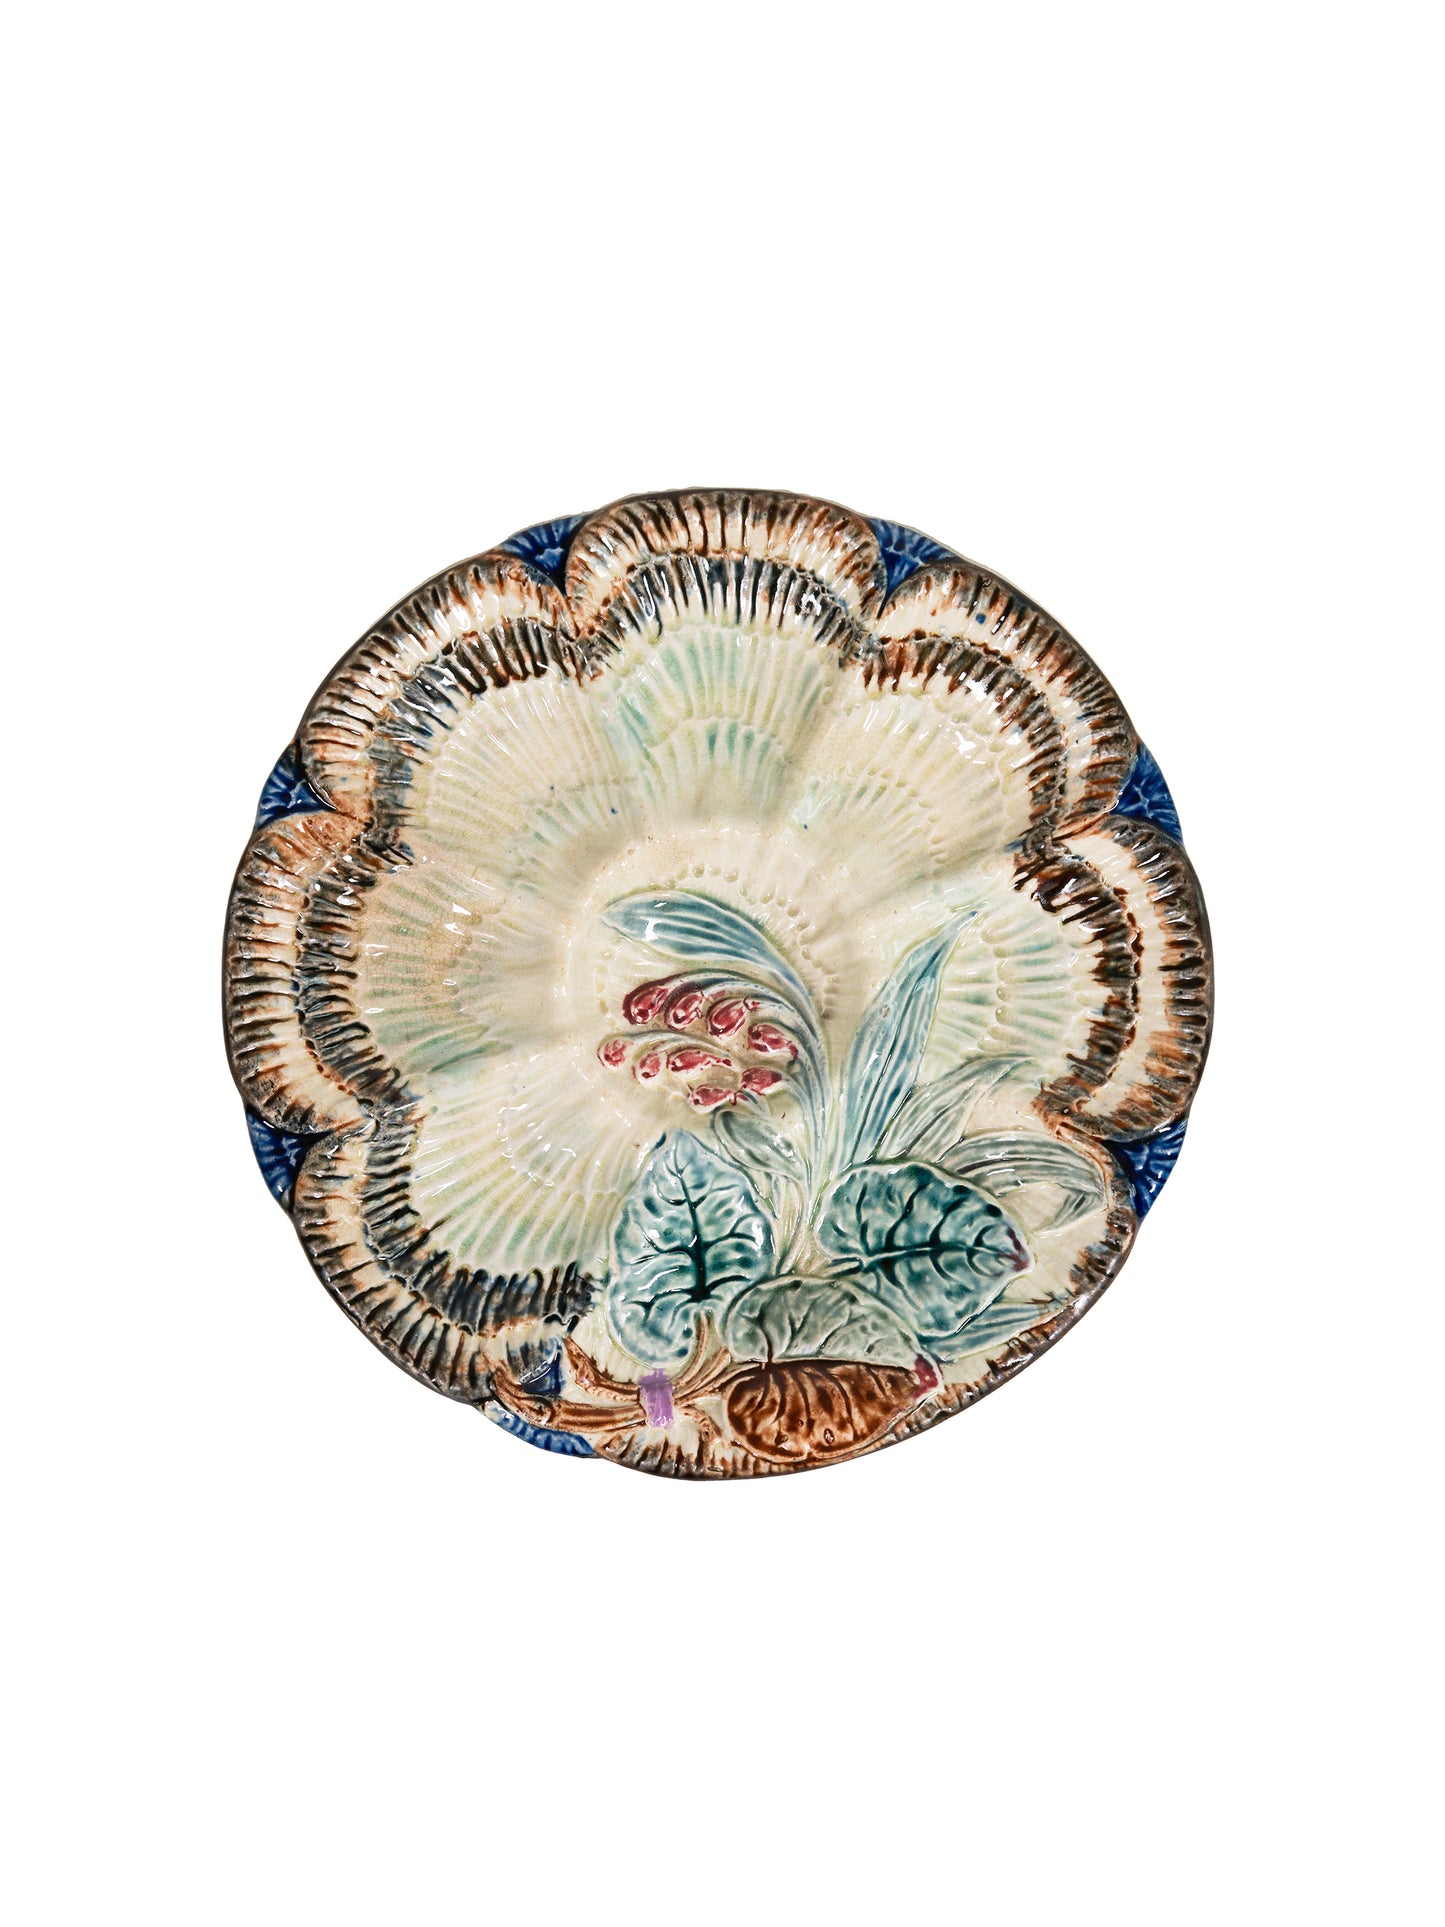 Vintage 1880s Wasmuel Oyster Plate 2 Weston Table 